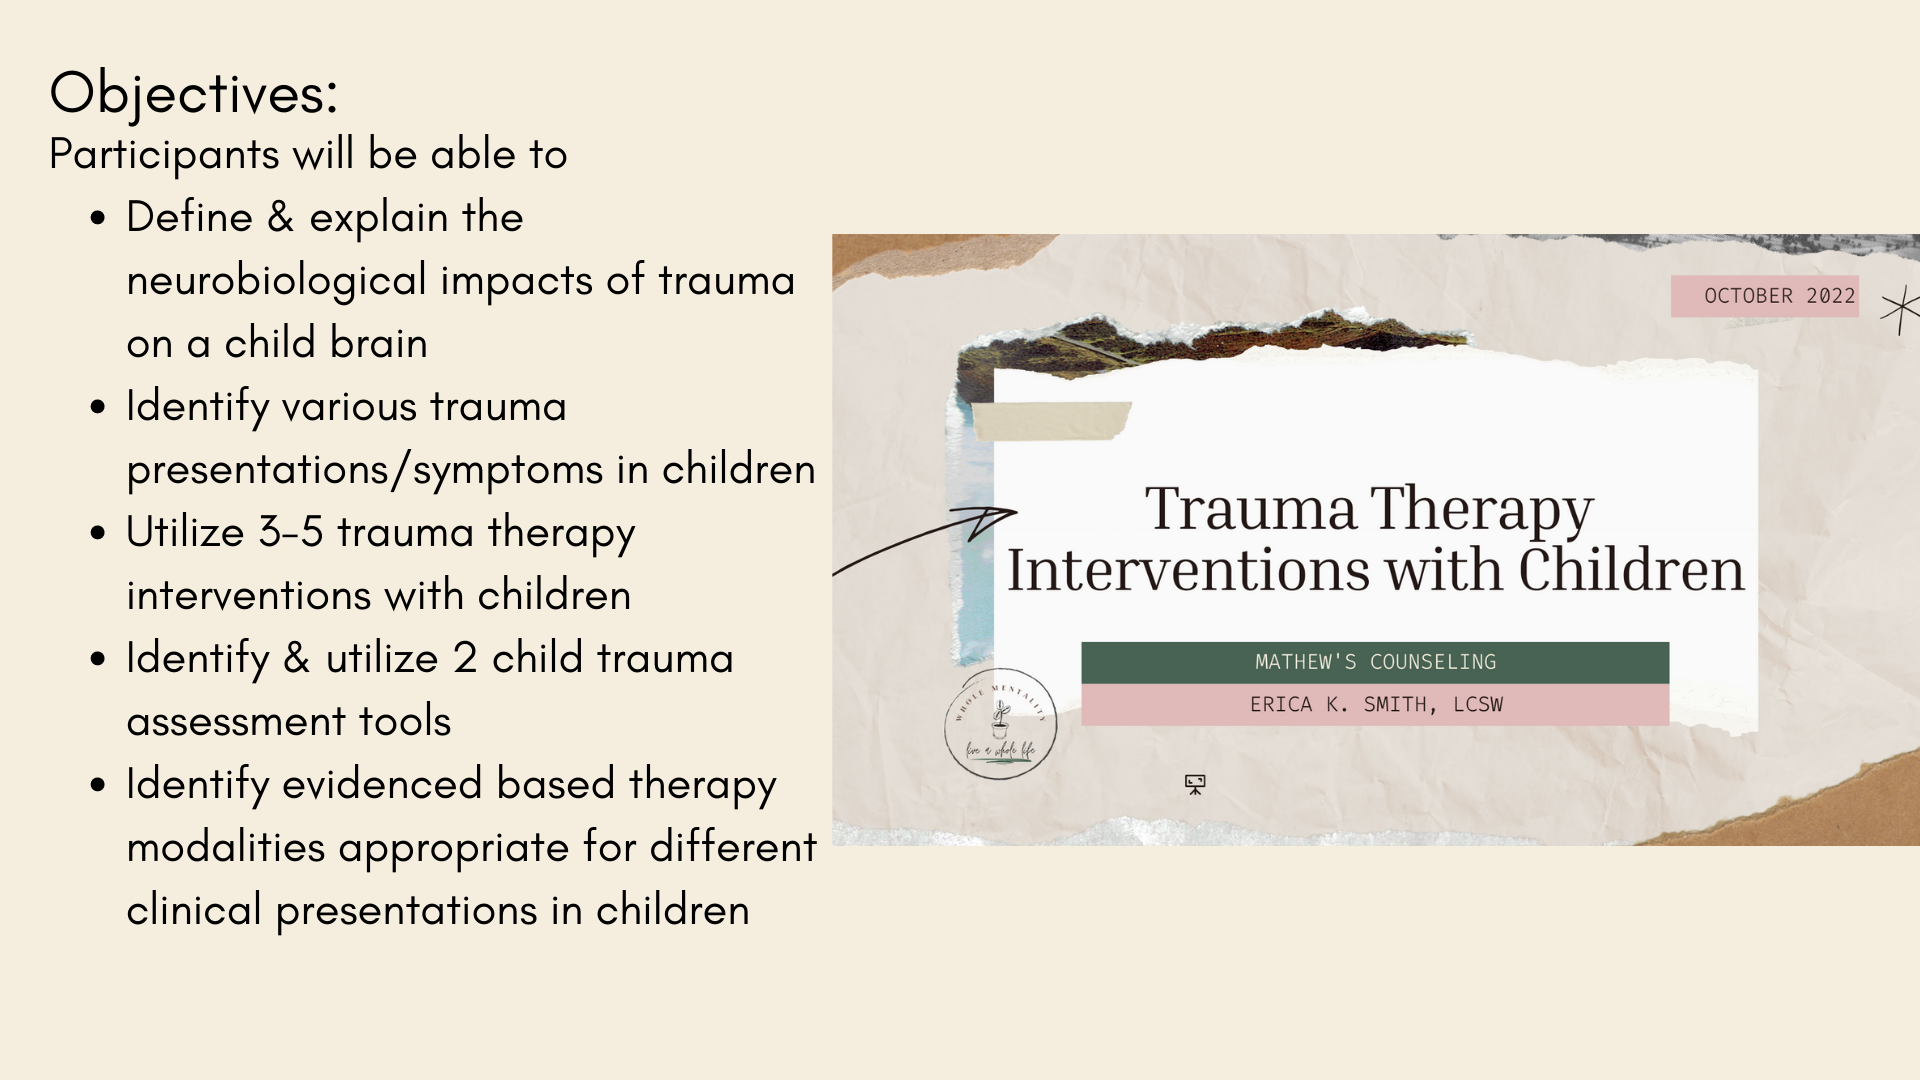 Trauma Therapy Interventions with Children